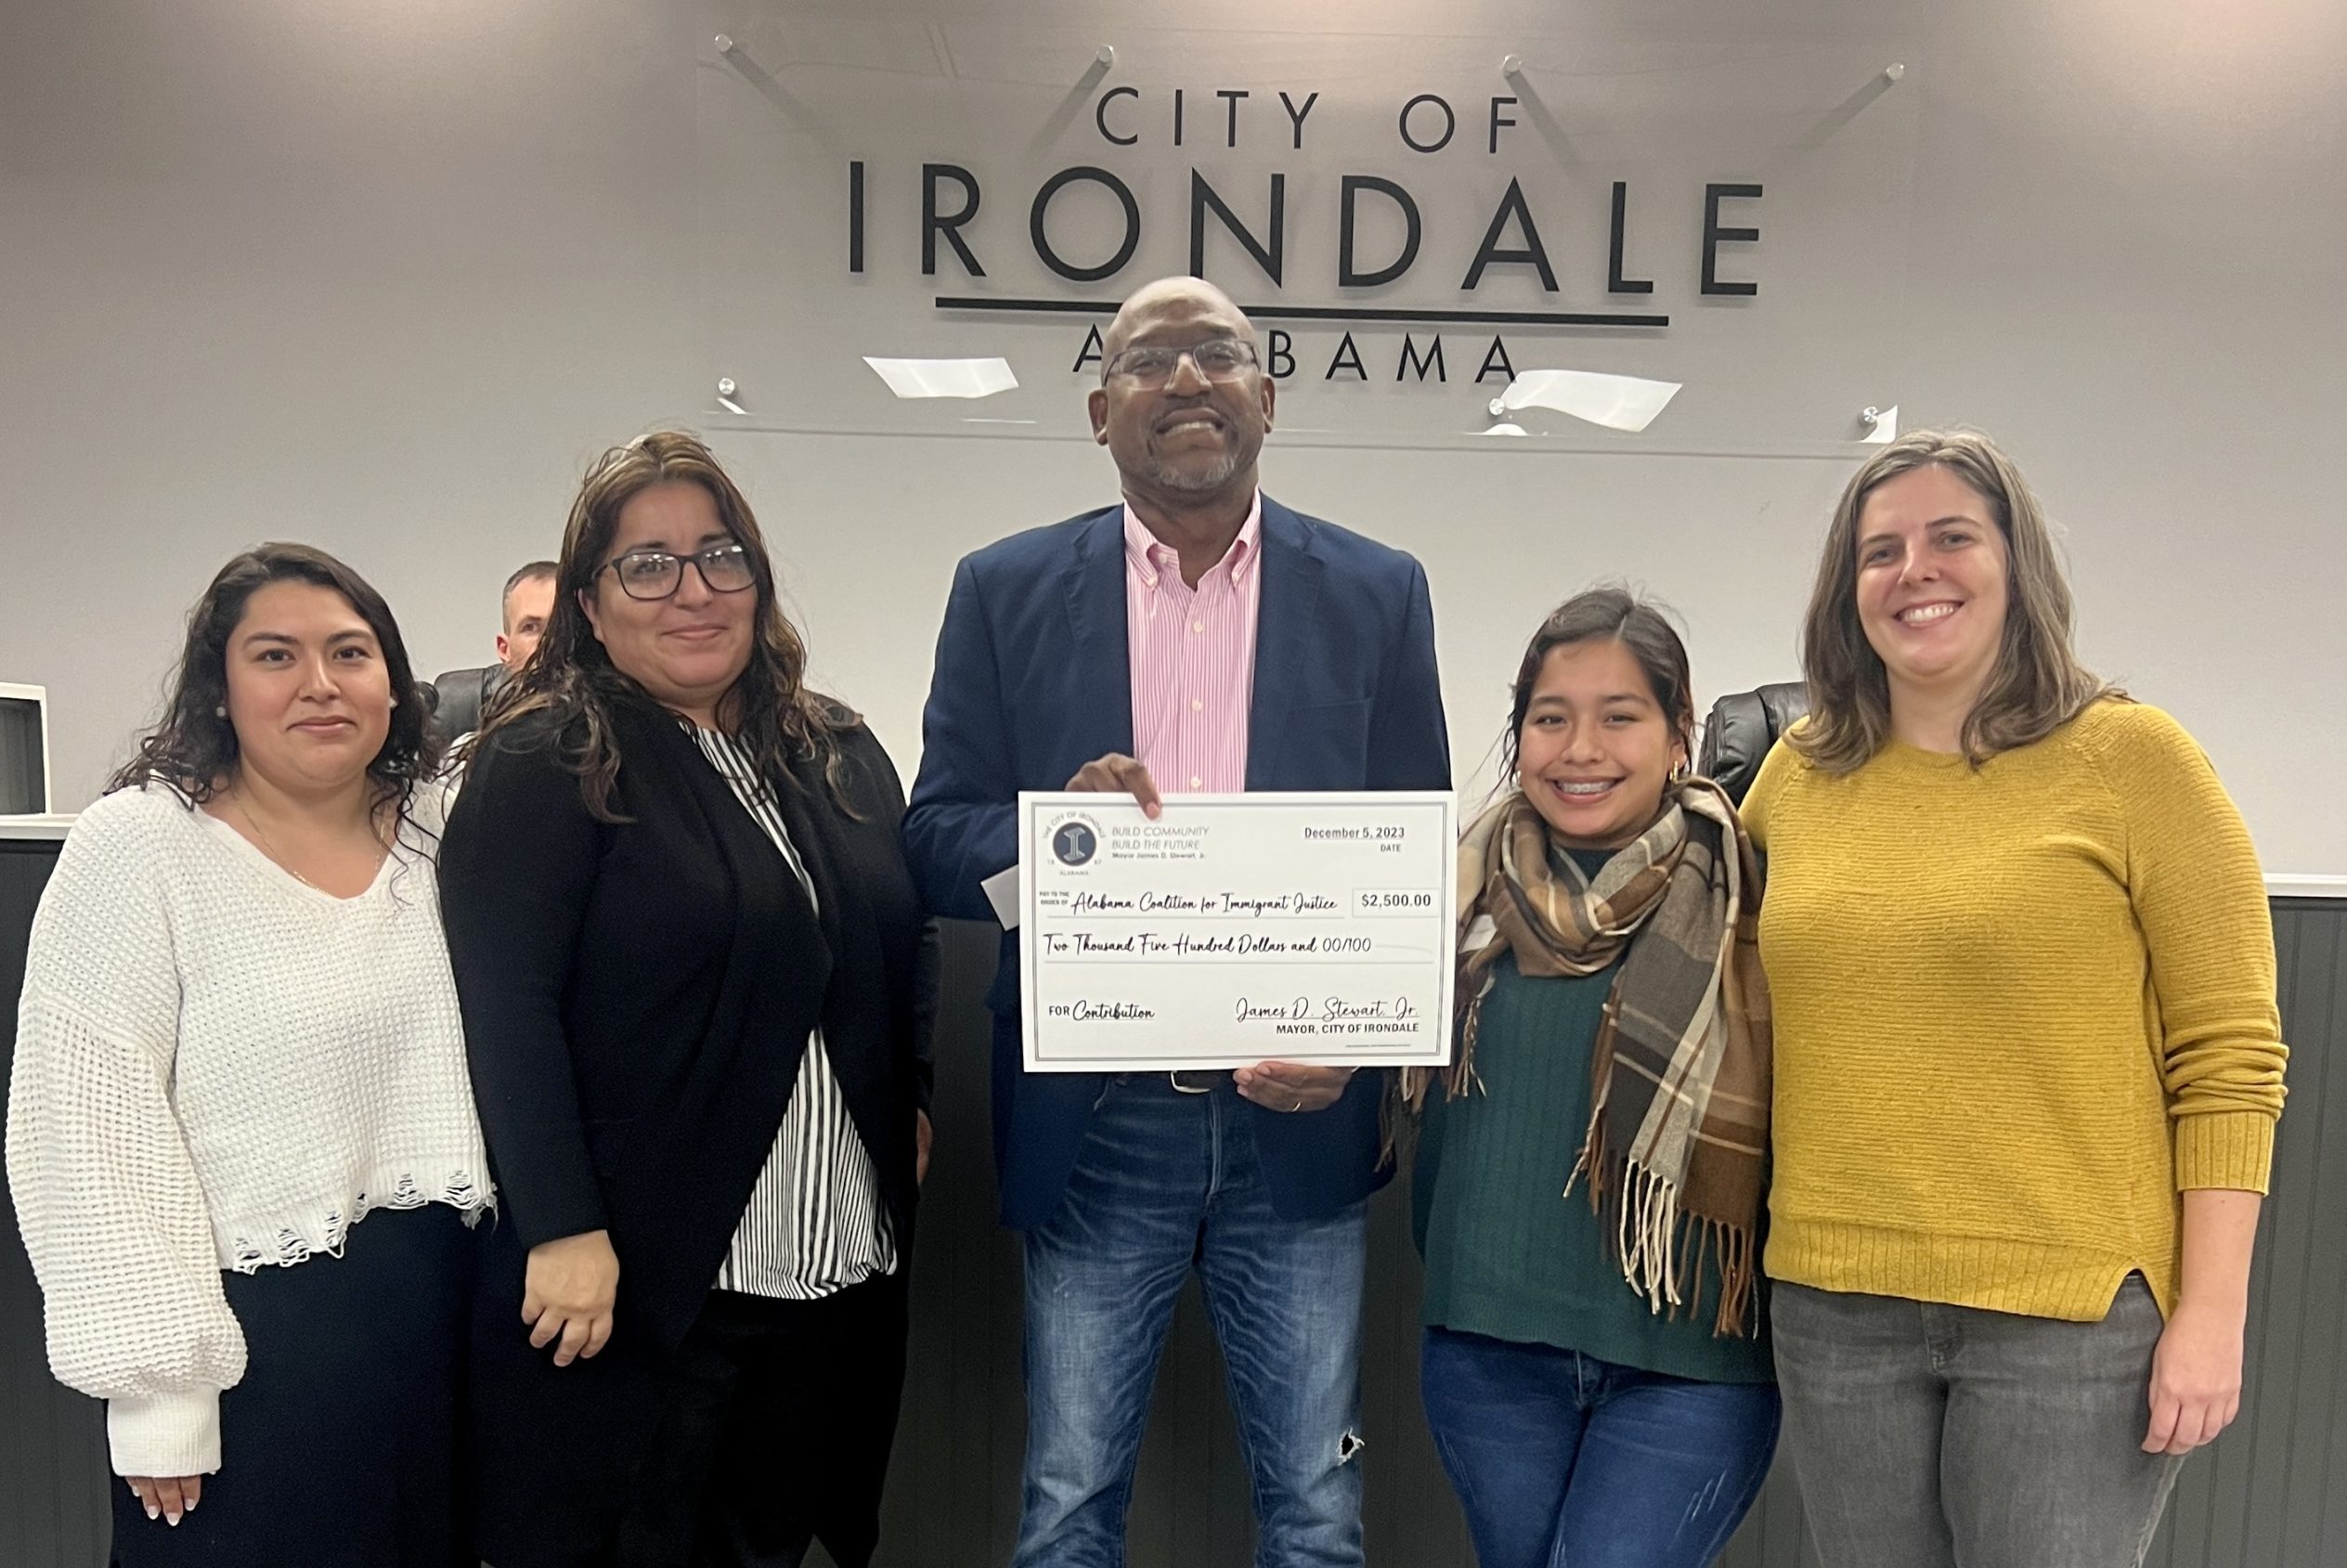 Irondale mayor pays tribute to long-time citizen, council donates to 2 nonprofits